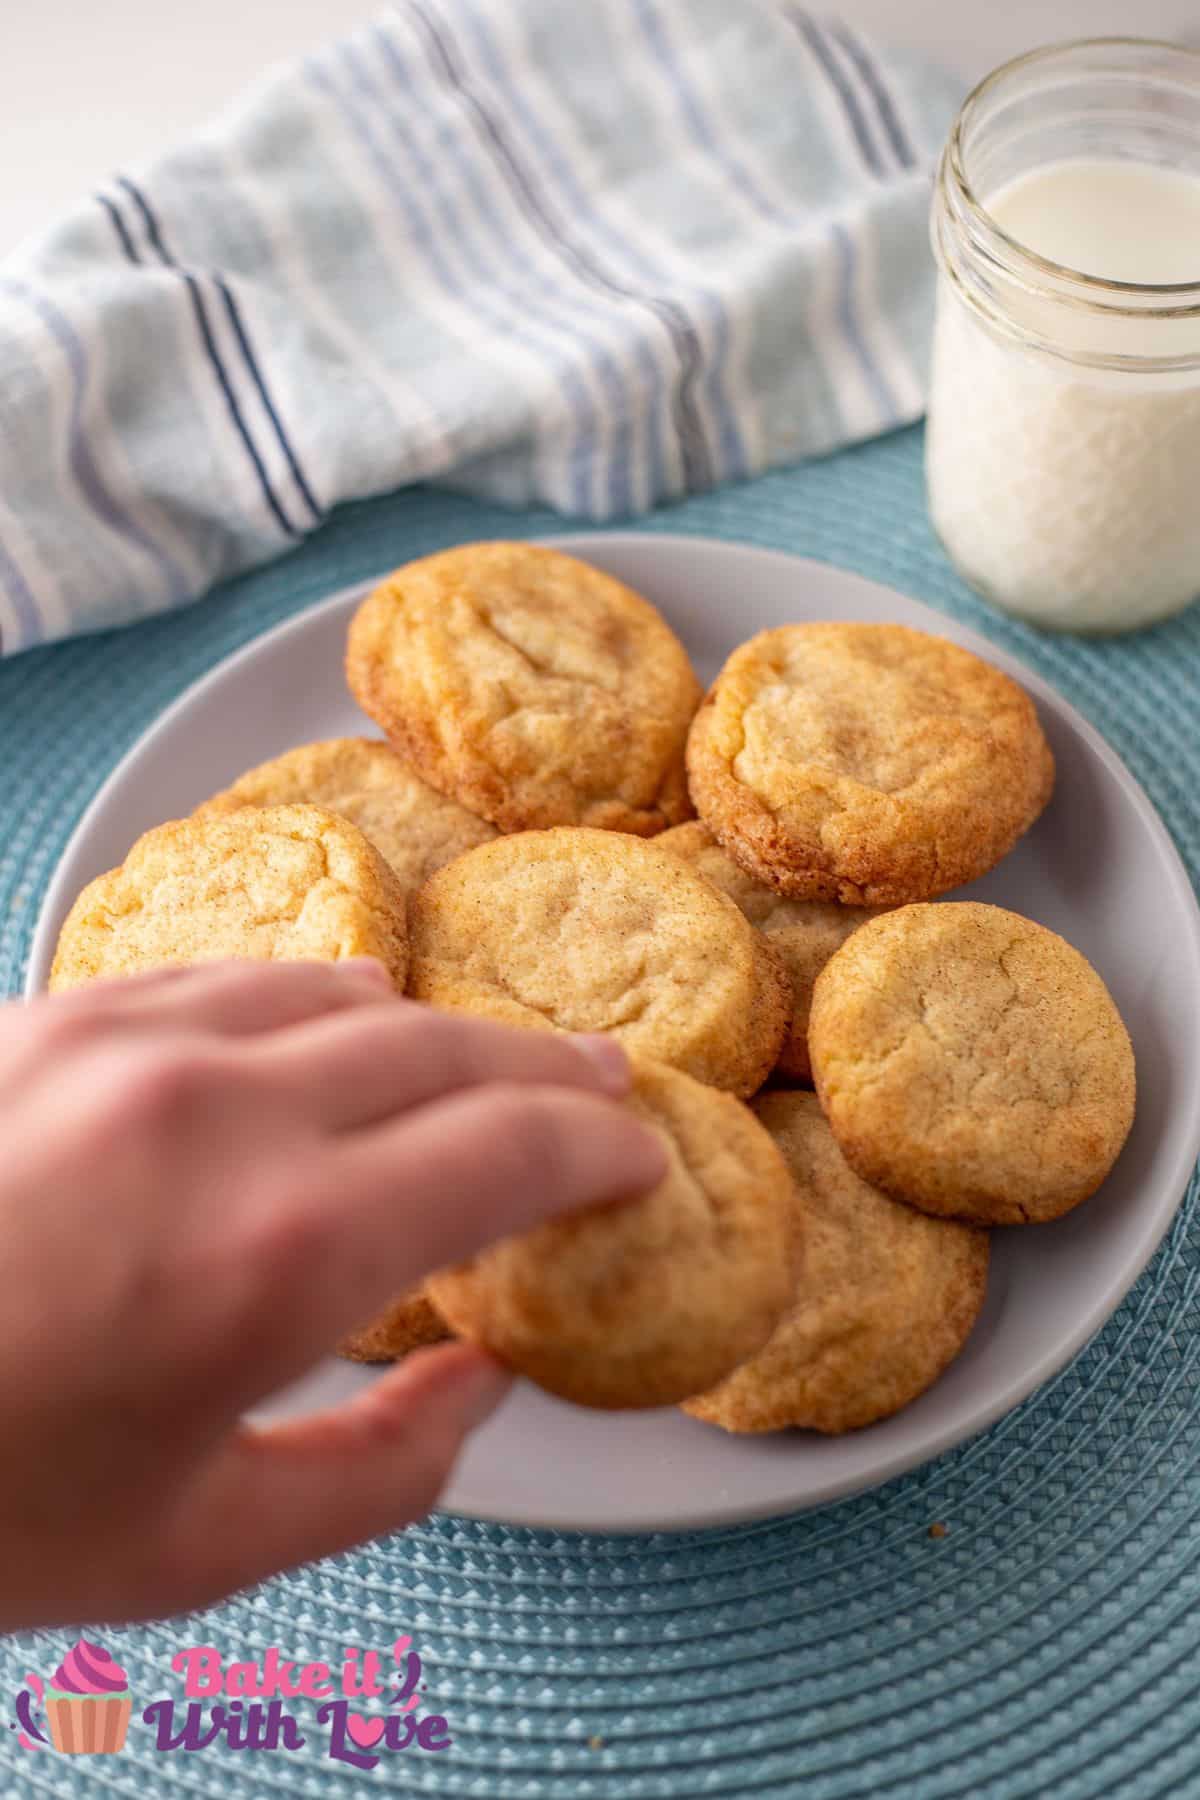 Plated snickerdoodles without cream of tartar served with a glass of milk and being picked up to eat.